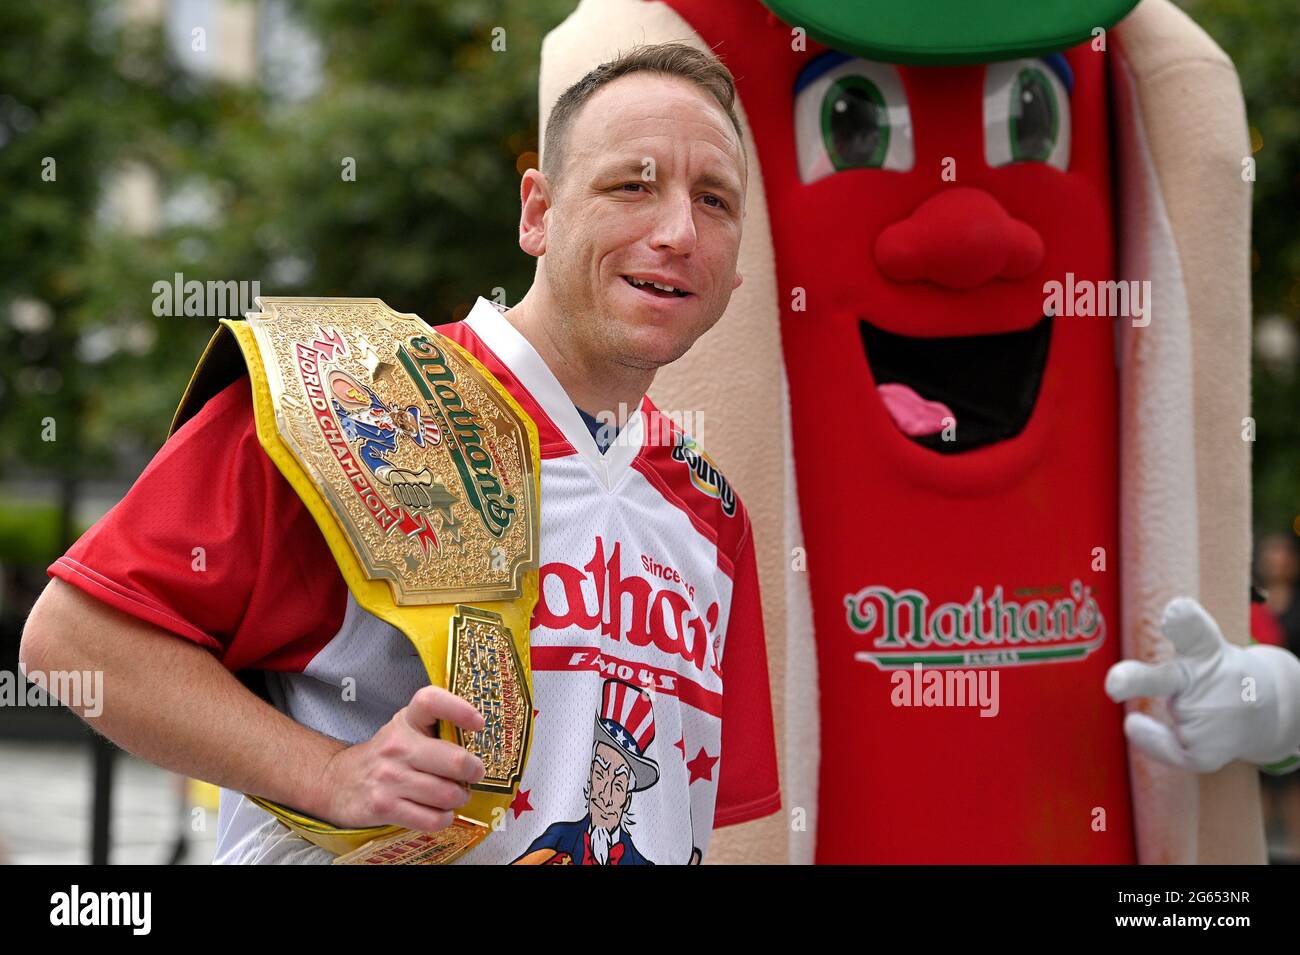 World record holder with 75 hot dogs eaten in 10 minutes, Joey Chestnut ...